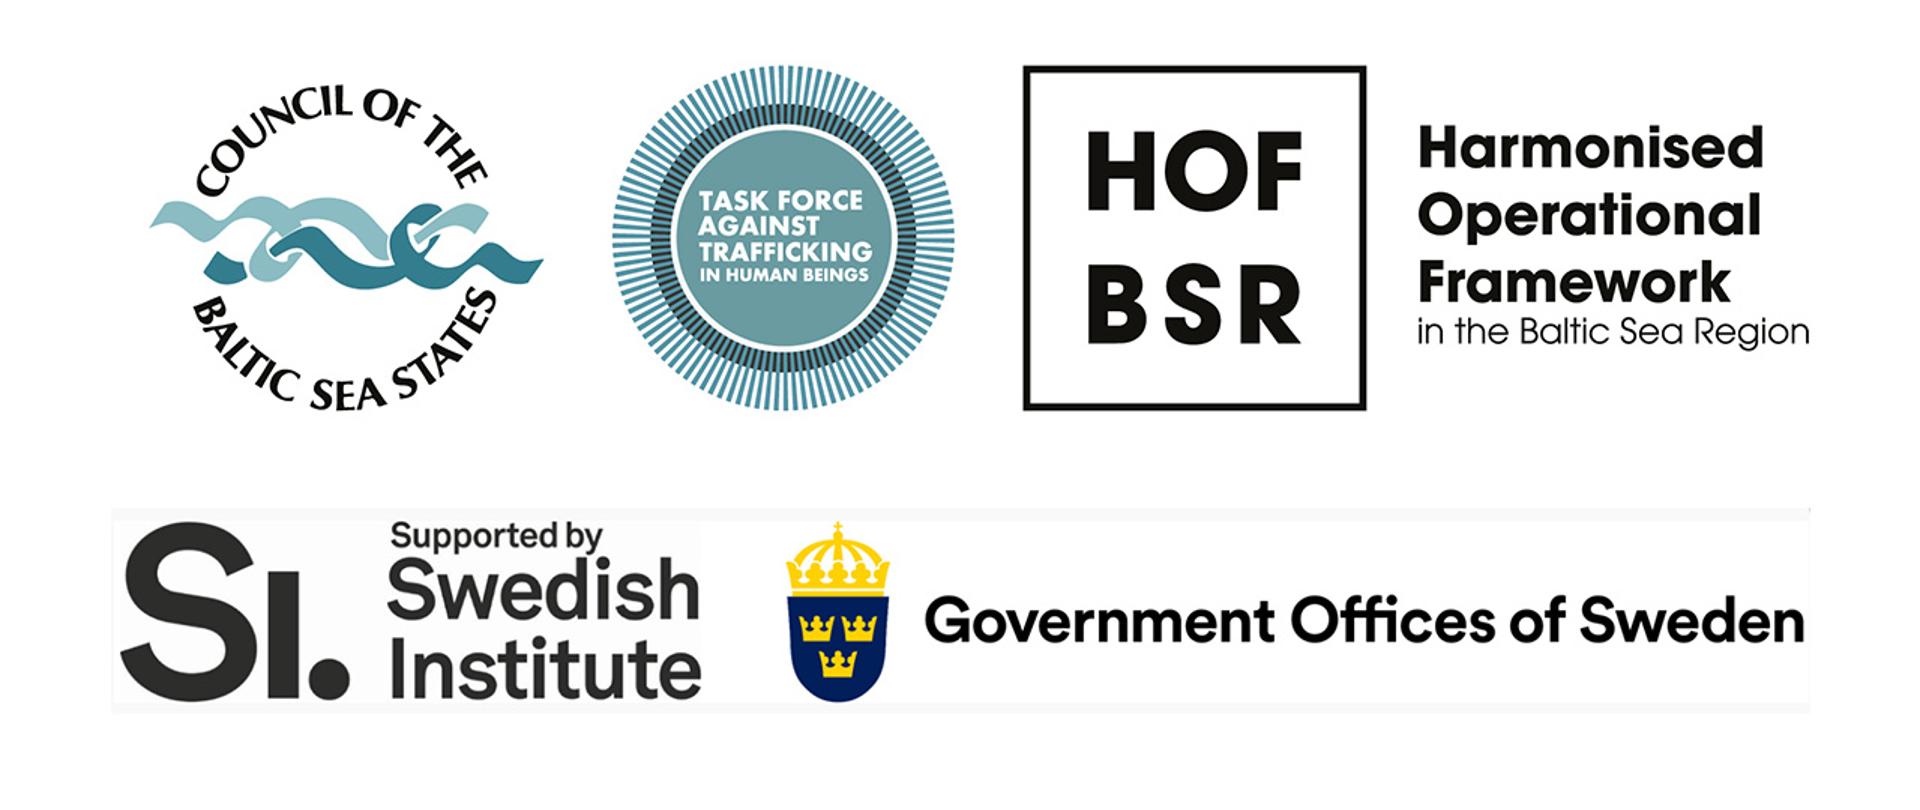 Na zdjęciu loga następujących podmiotów: Council of the Baltic Sea States, Task Force Against Trafficking in Human Beings, HOF BSR, Harmonised Operational Franework in the Baltic Sea Region, SI. Supported by Swedish Institute, Governmaent Offices of Sweden 